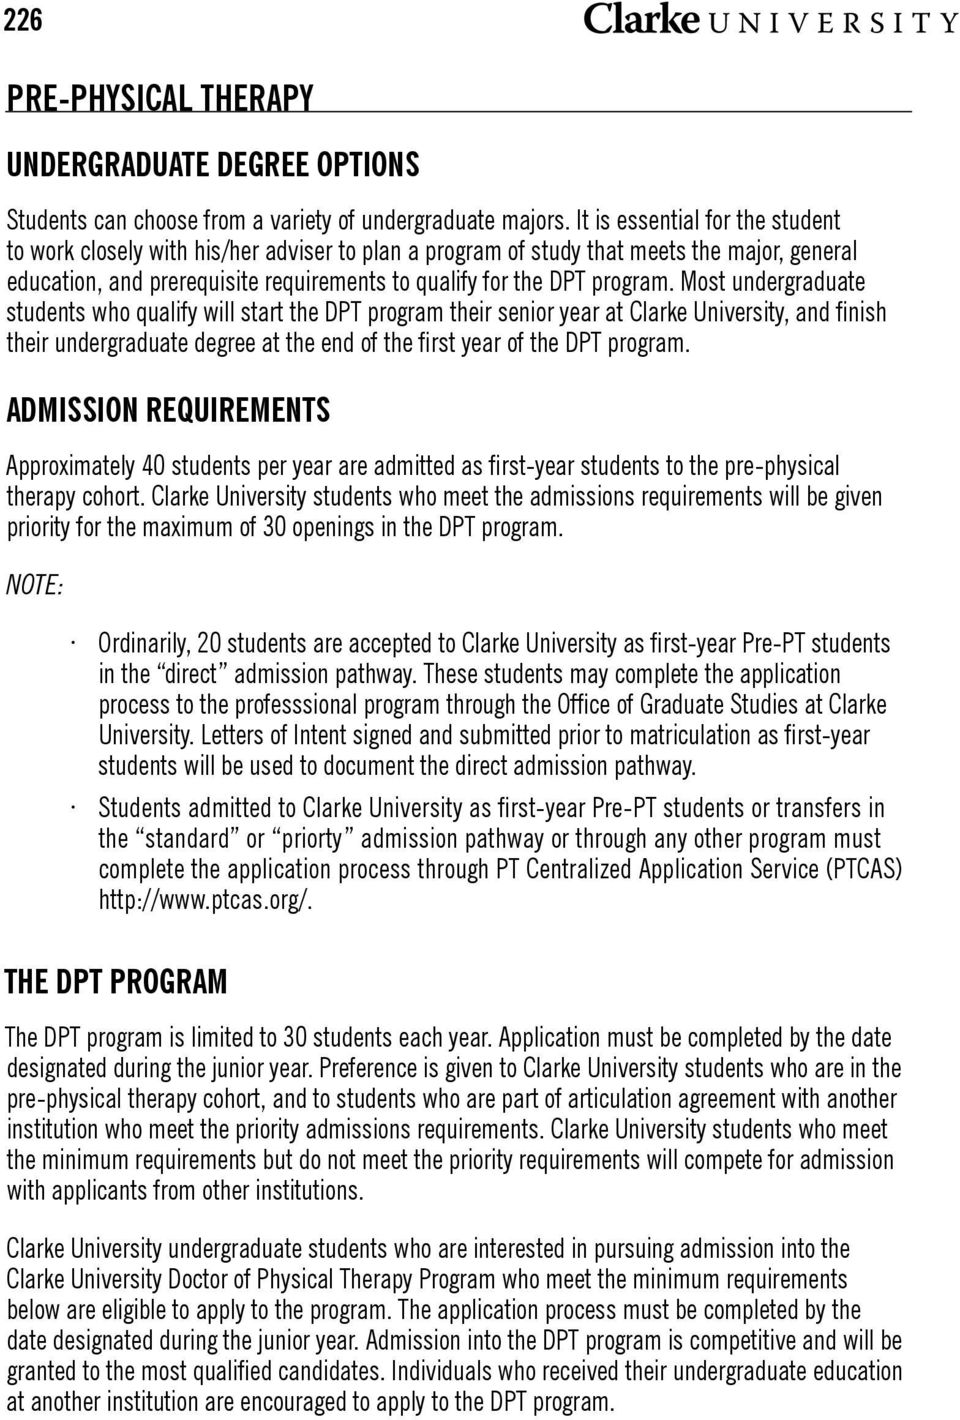 Most undergraduate students who qualify will start the DPT program their senior year at Clarke University, and finish their undergraduate degree at the end of the first year of the DPT program.